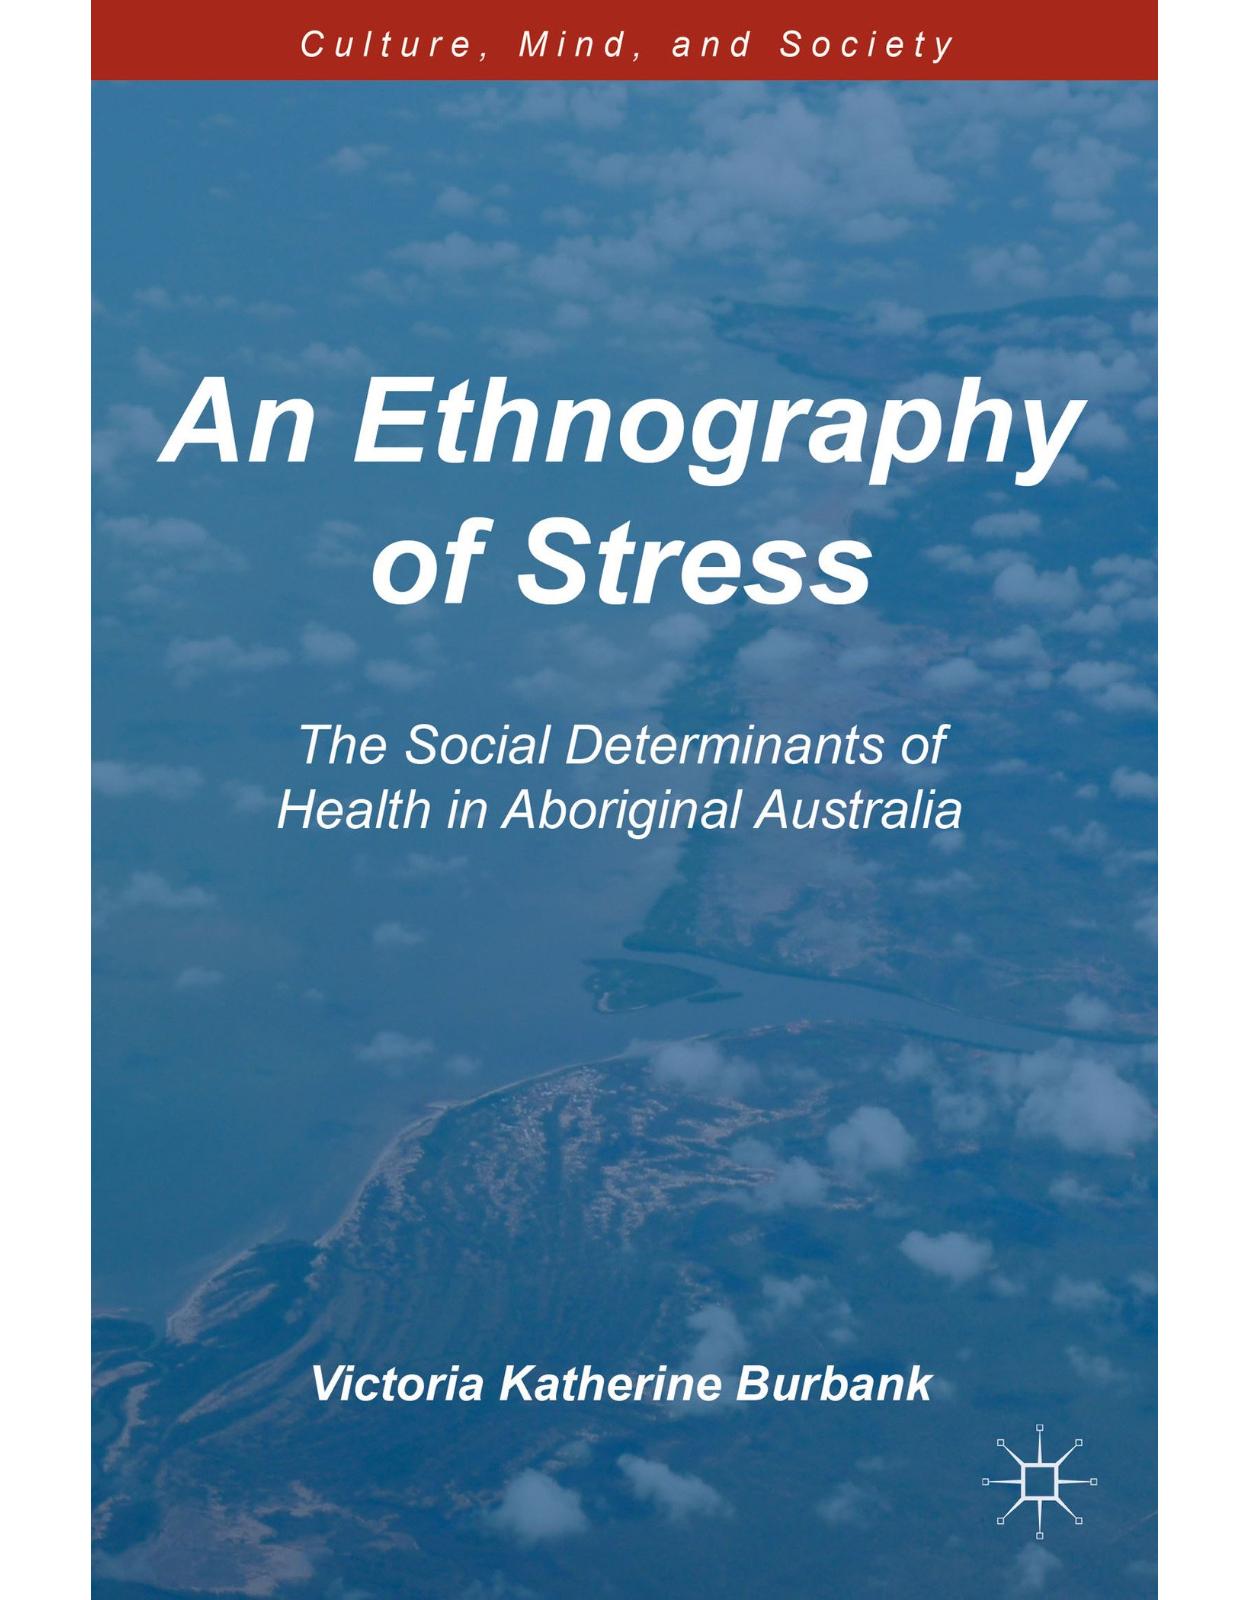 An Ethnography of Stress: The Social Determinants of Health in Aboriginal Australia (Culture, Mind and Society)